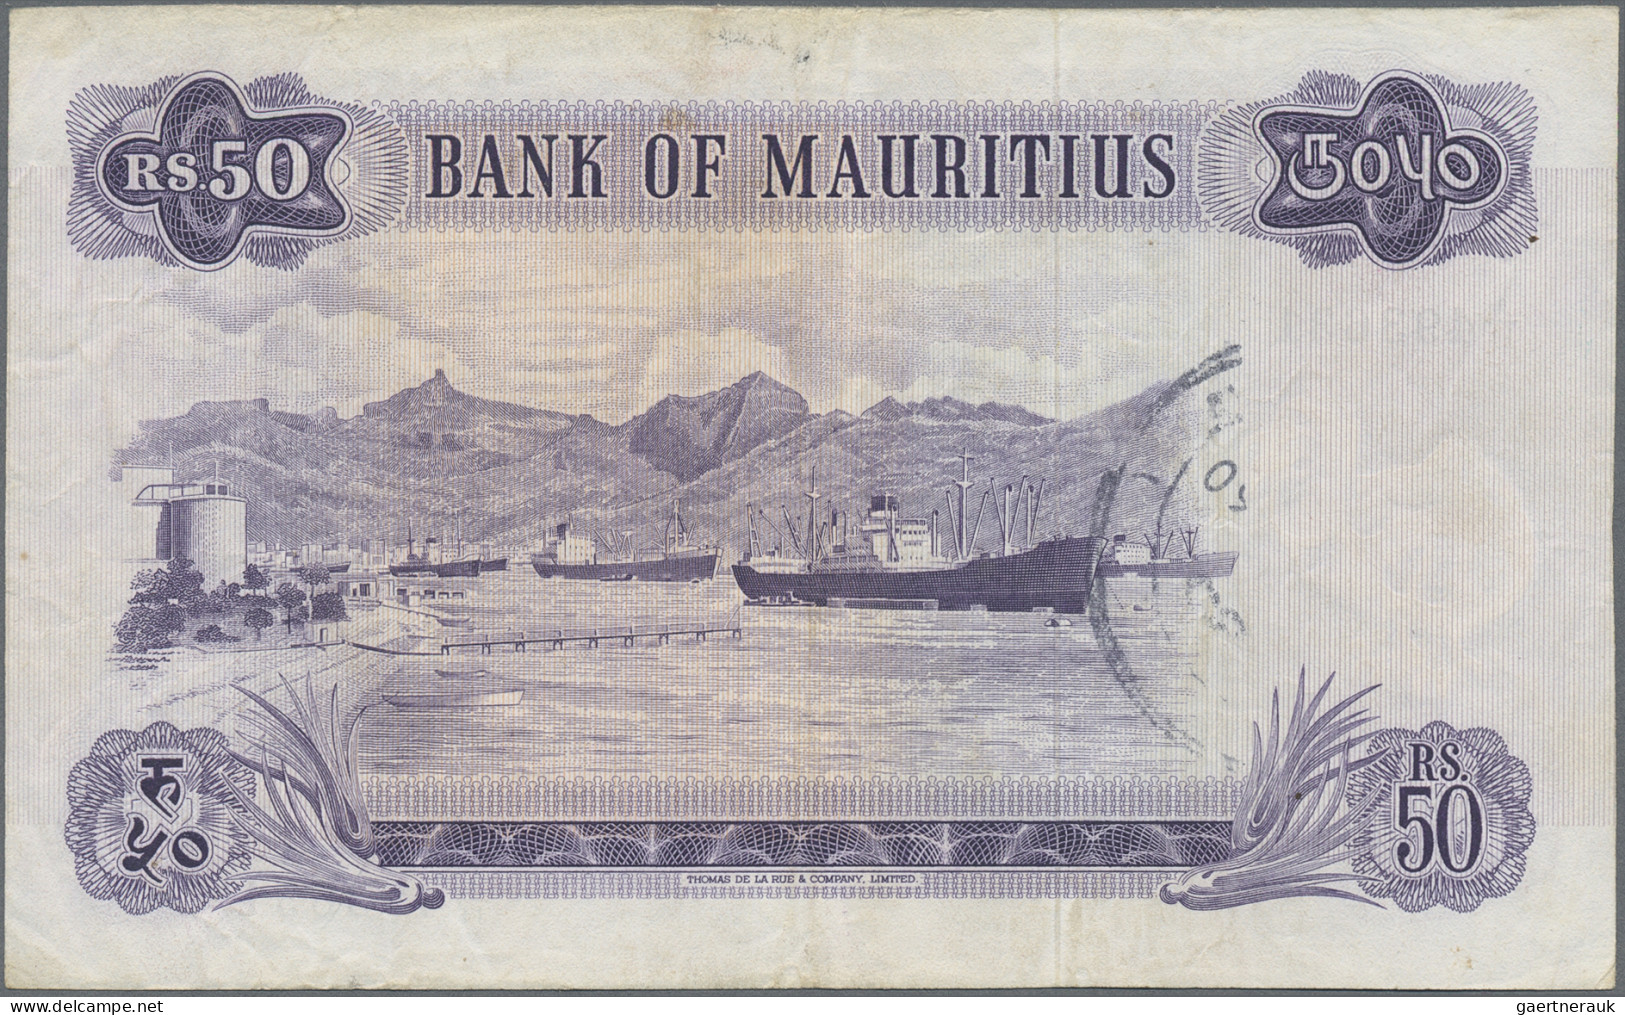 Mauritius: Bank of Mauritius, lot with 4 banknotes, 1967-1981 series, with 5 Rup